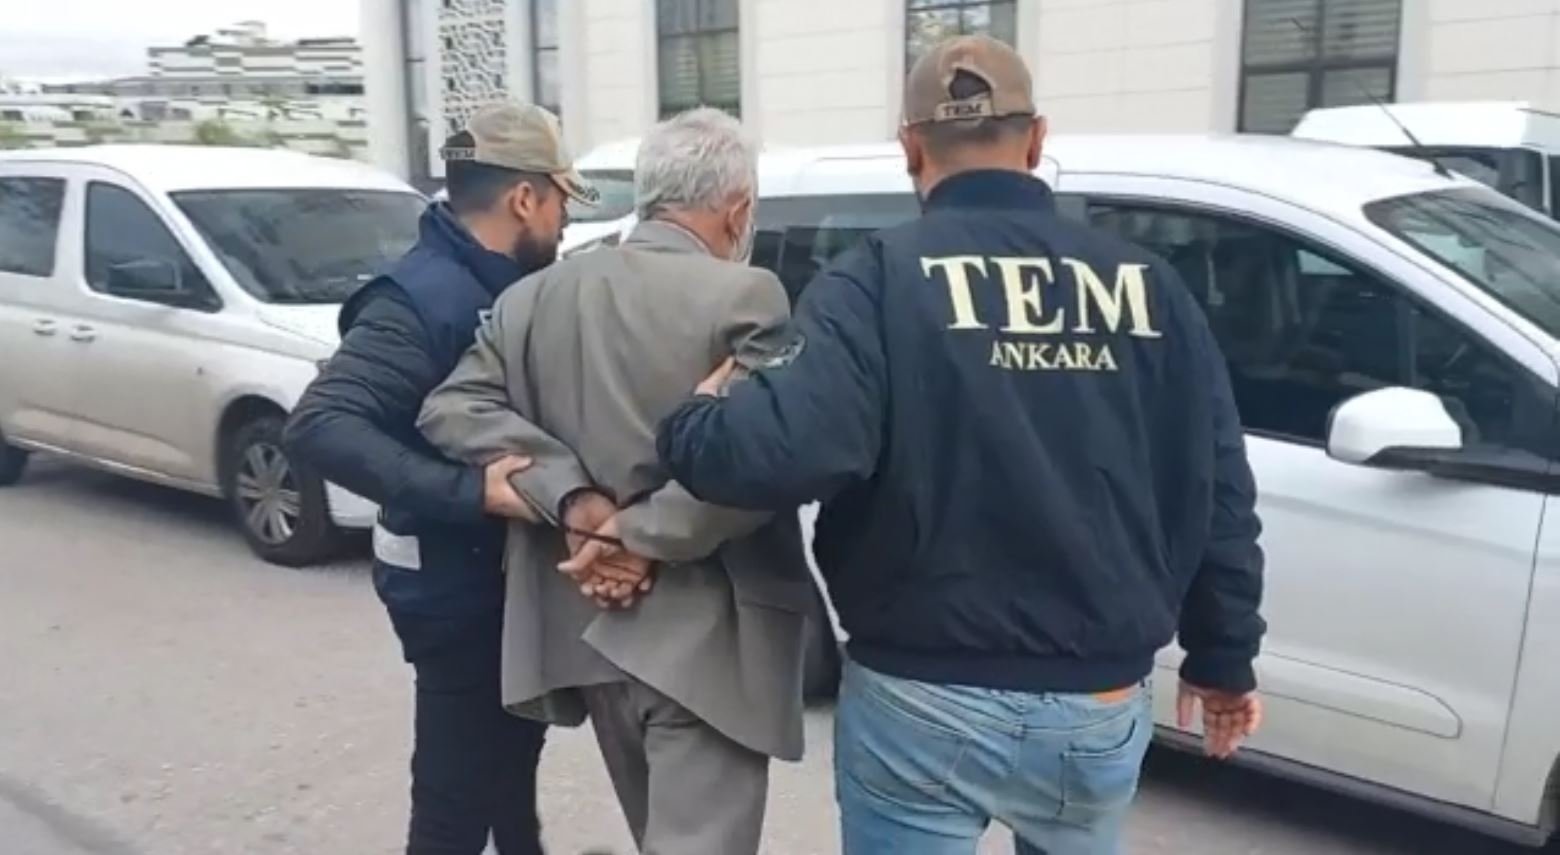 Police officers escort a foreign national after his arrest for suspected links to the Daesh terrorist group in the capital Ankara, Türkiye, April 26, 2023. (DHA Photo)